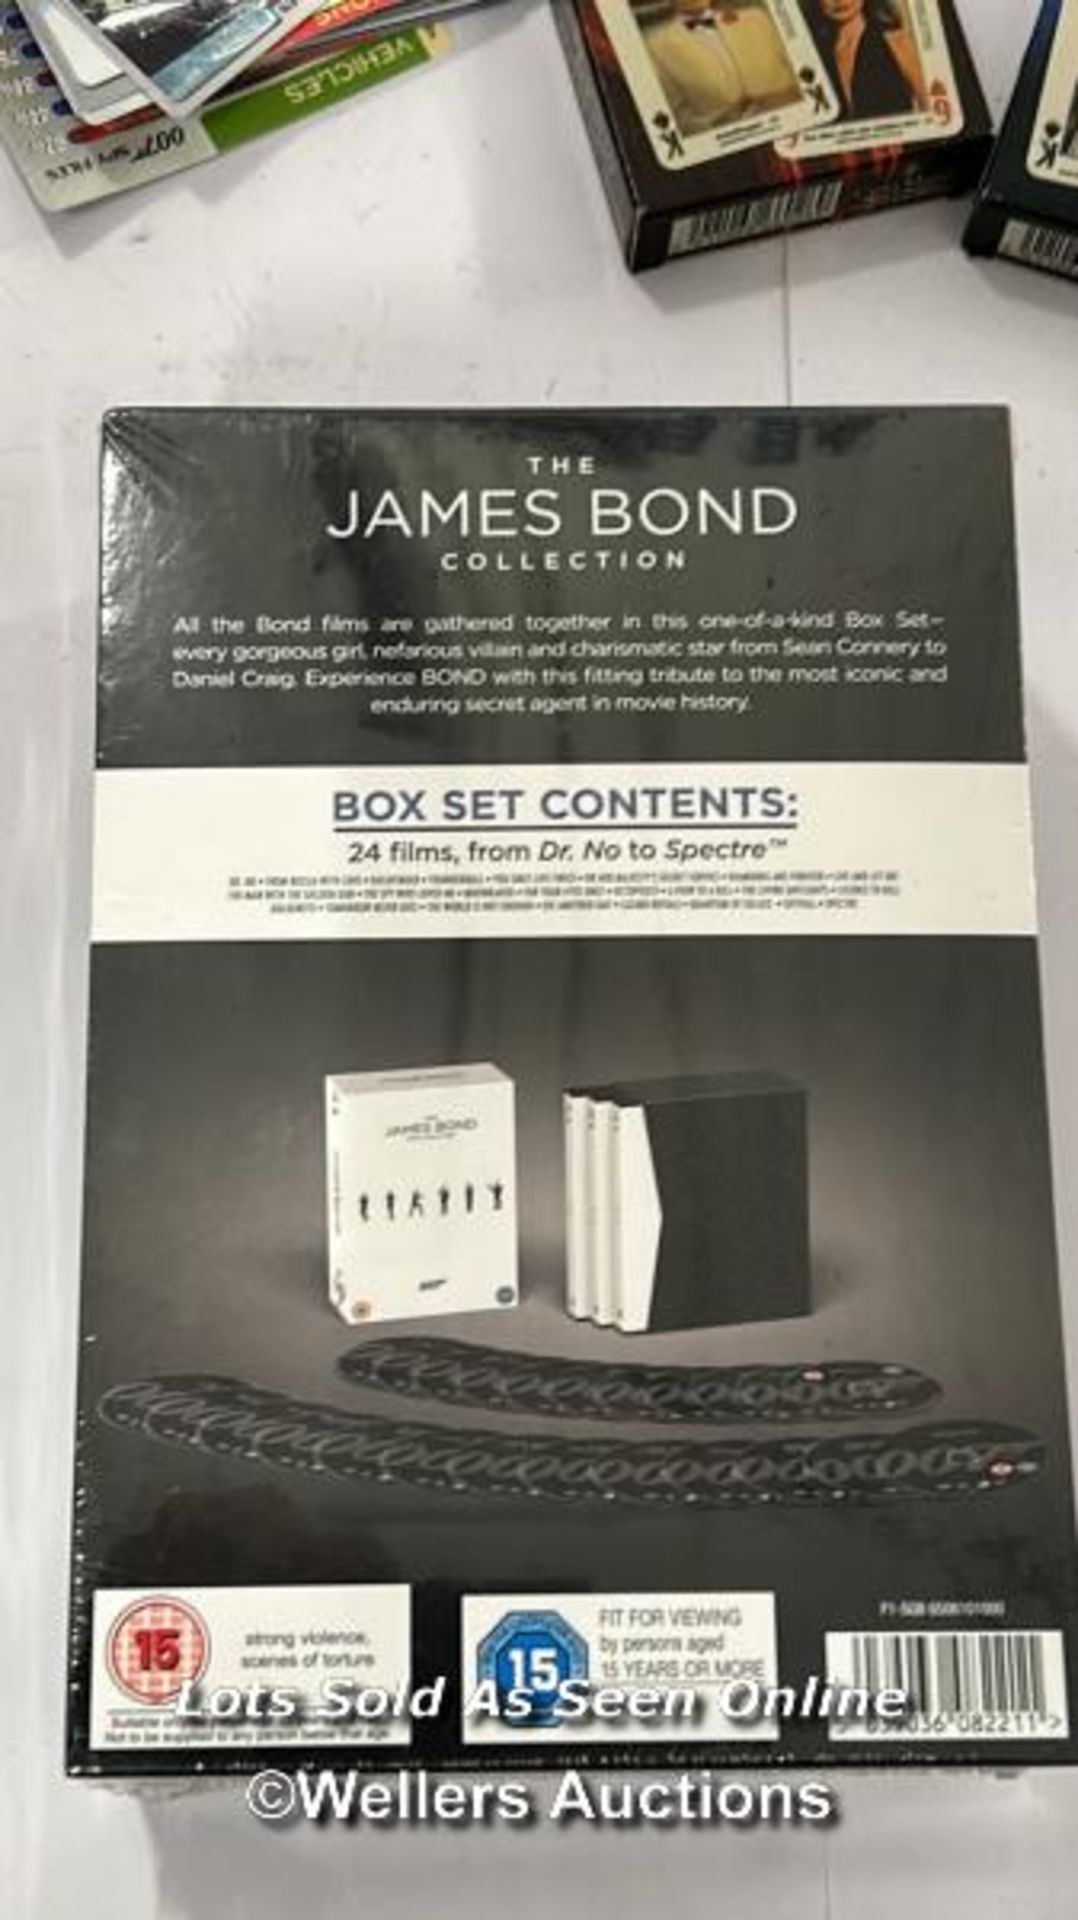 James Bond - Collectors cards, magazines, playing cards and sealed DVD box set / AN8 - Image 8 of 8